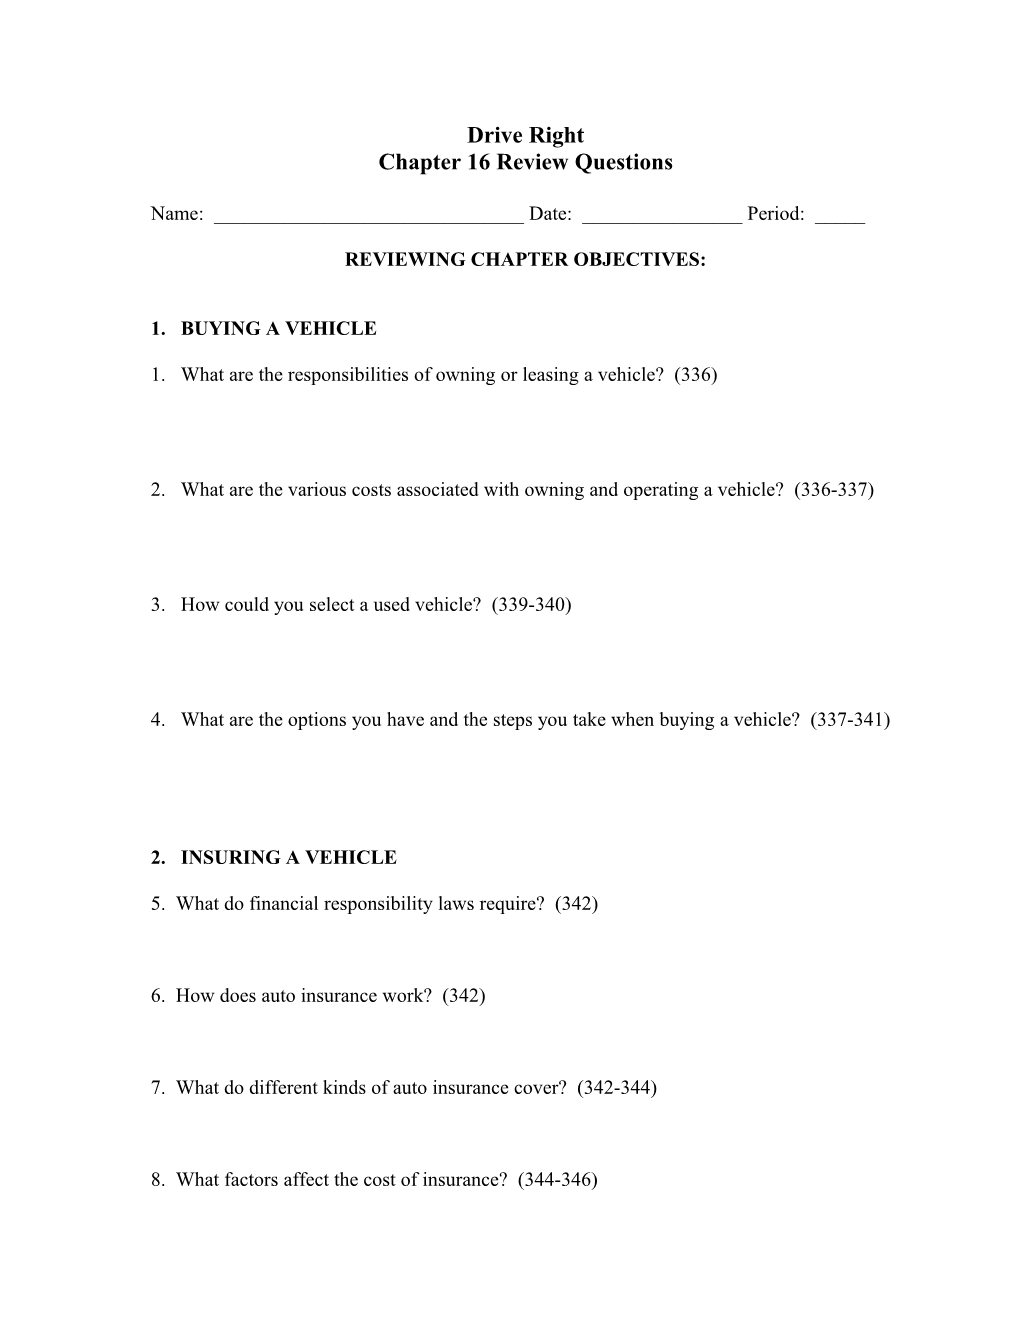 Chapter 16Review Questions